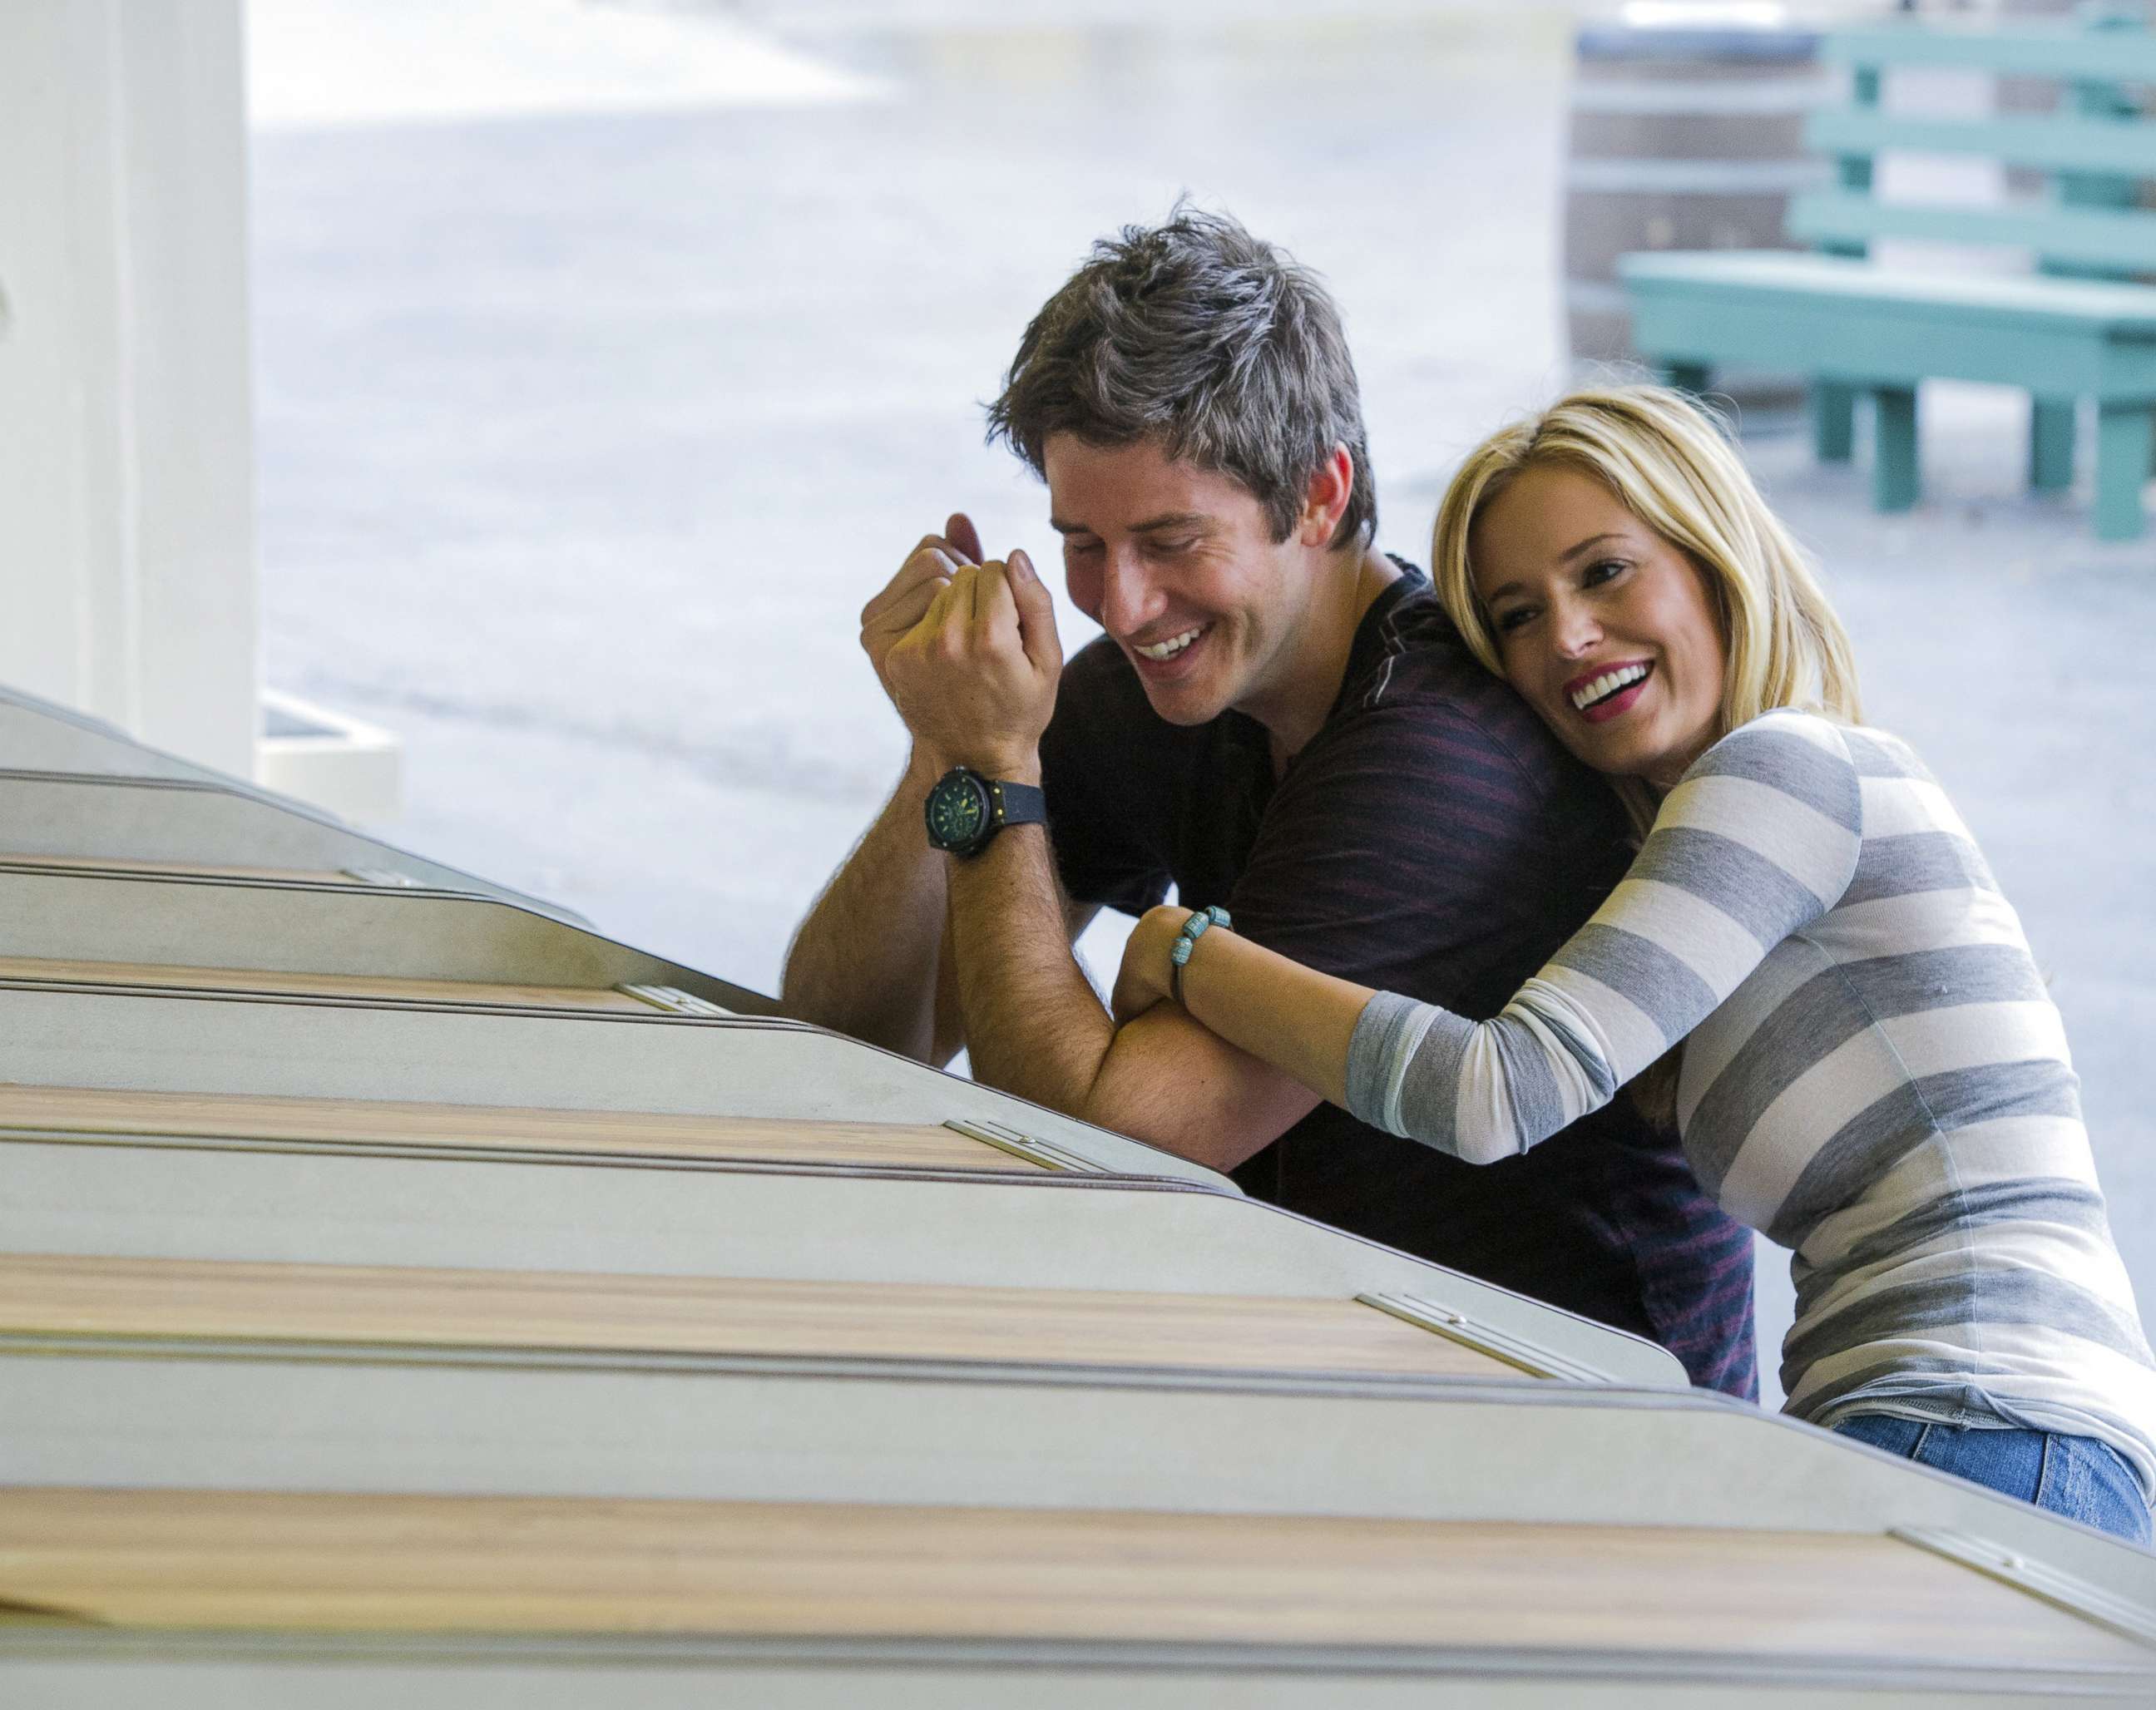 PHOTO: Emily Maynard and Arie Luyendyk Jr. in a scene from the "Bachelorette" in 2012.